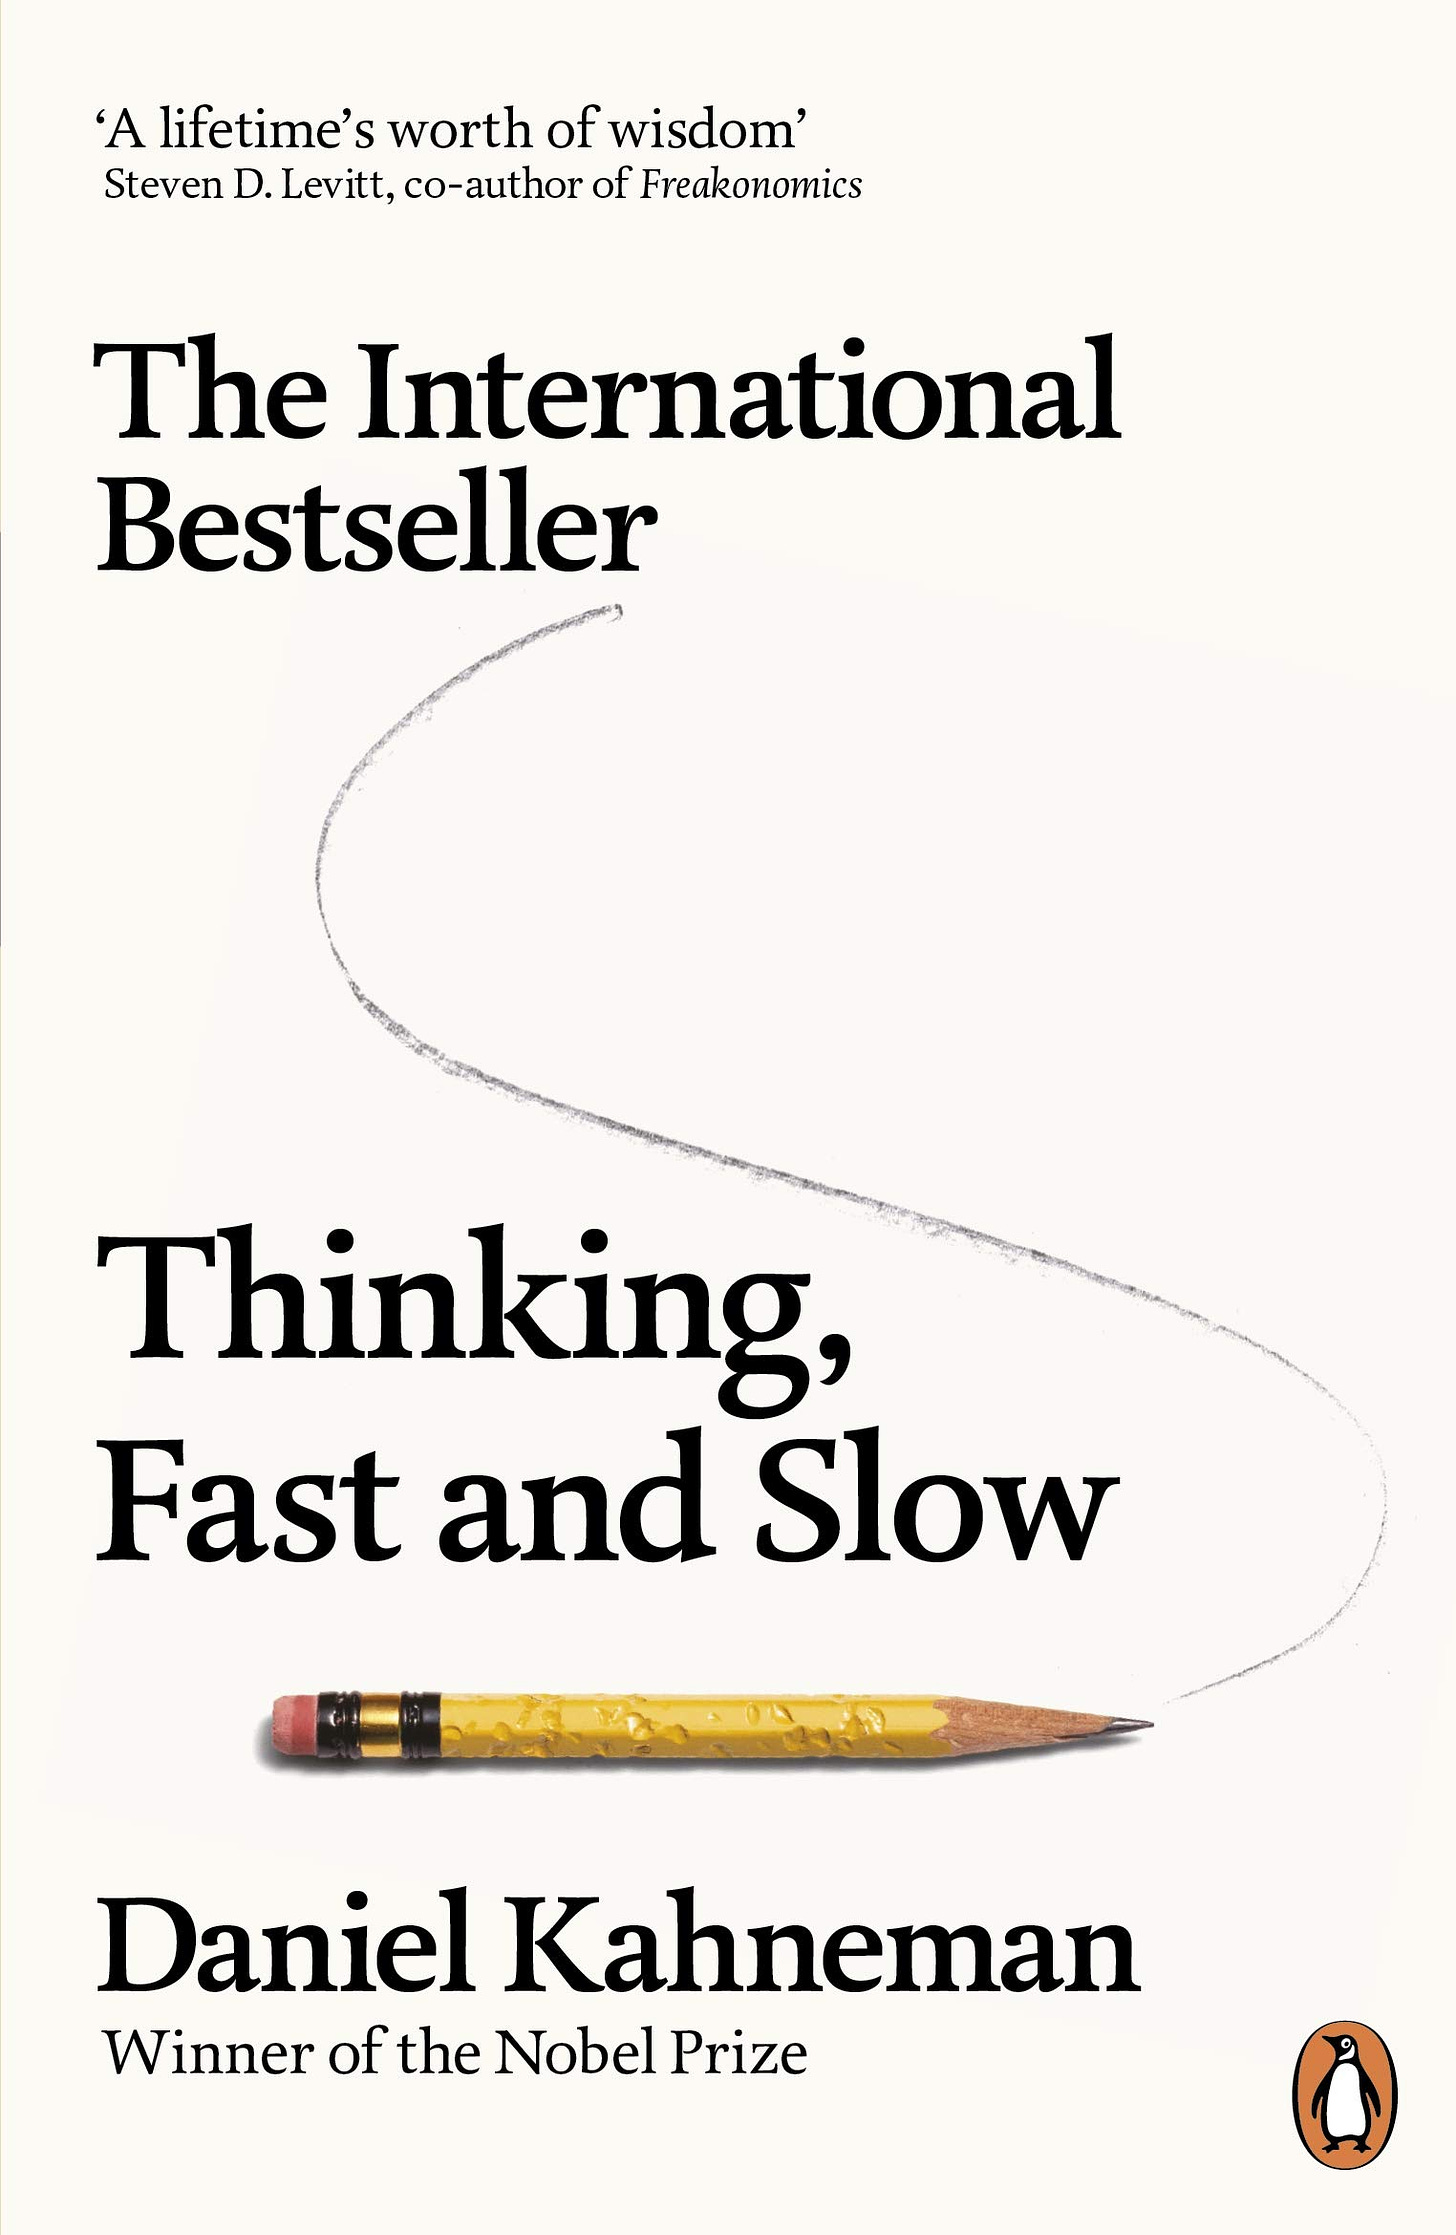 Buy Thinking, Fast and Slow Book Online at Low Prices in India | Thinking,  Fast and Slow Reviews & Ratings - Amazon.in